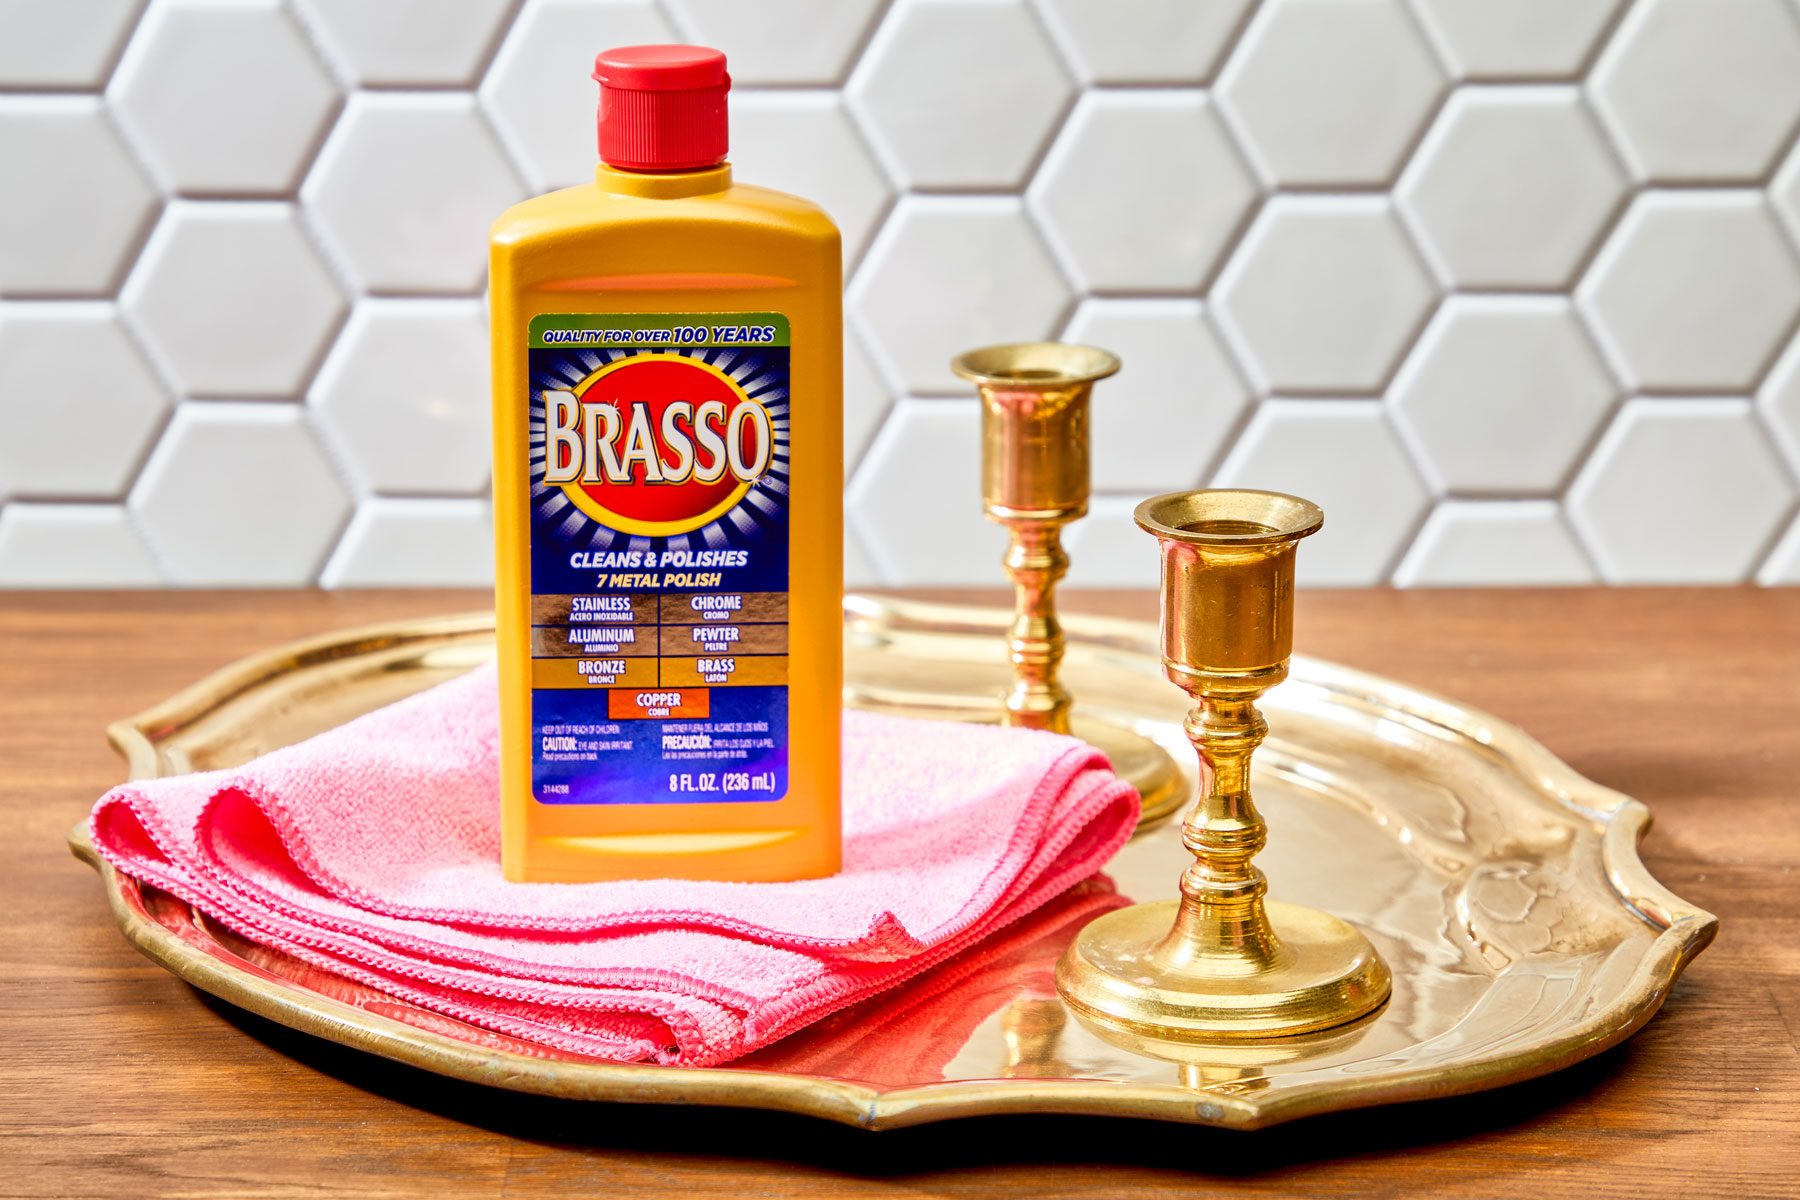 How to Correctly Polish Brass, According to an Expert